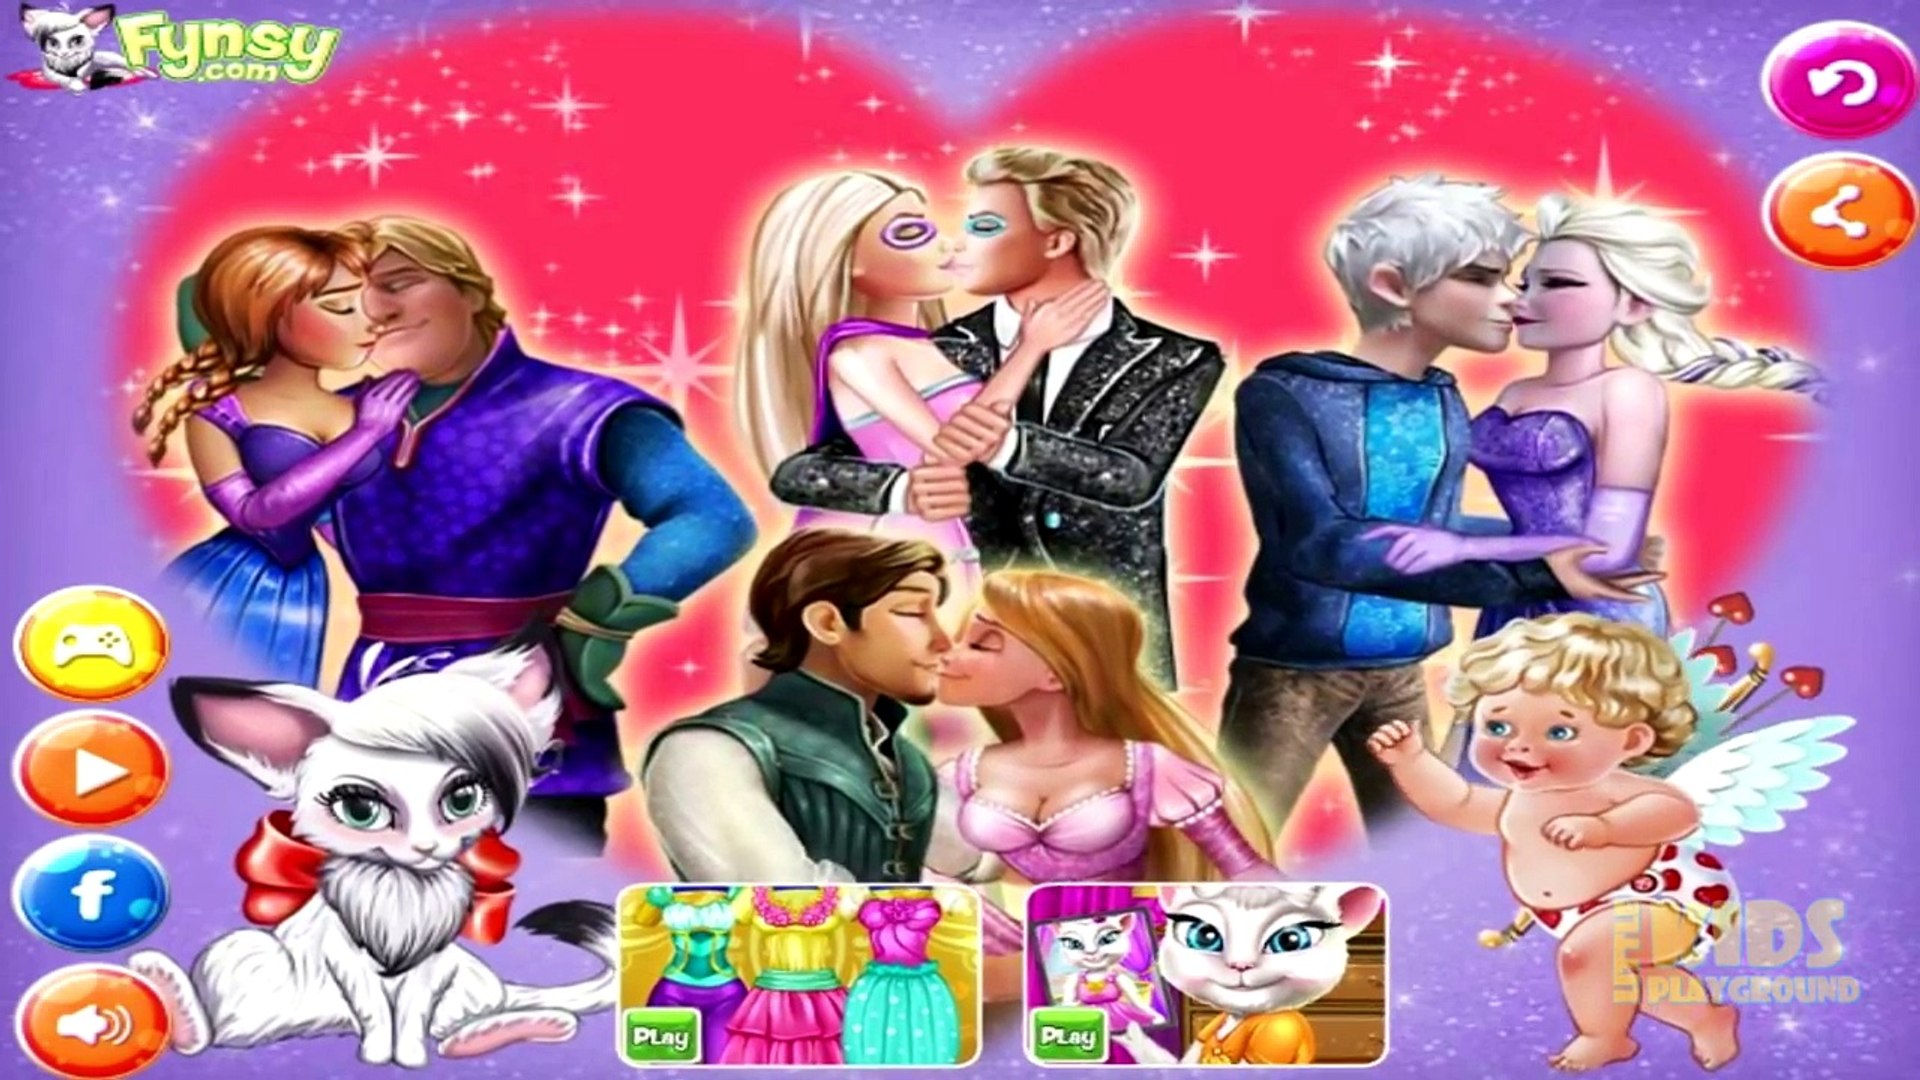 Disney Princess Elsa And Ariel Breaks Up With Their Boyfriends - Love  Problems Game For Kids-Dnhjhdbrwki - Video Dailymotion